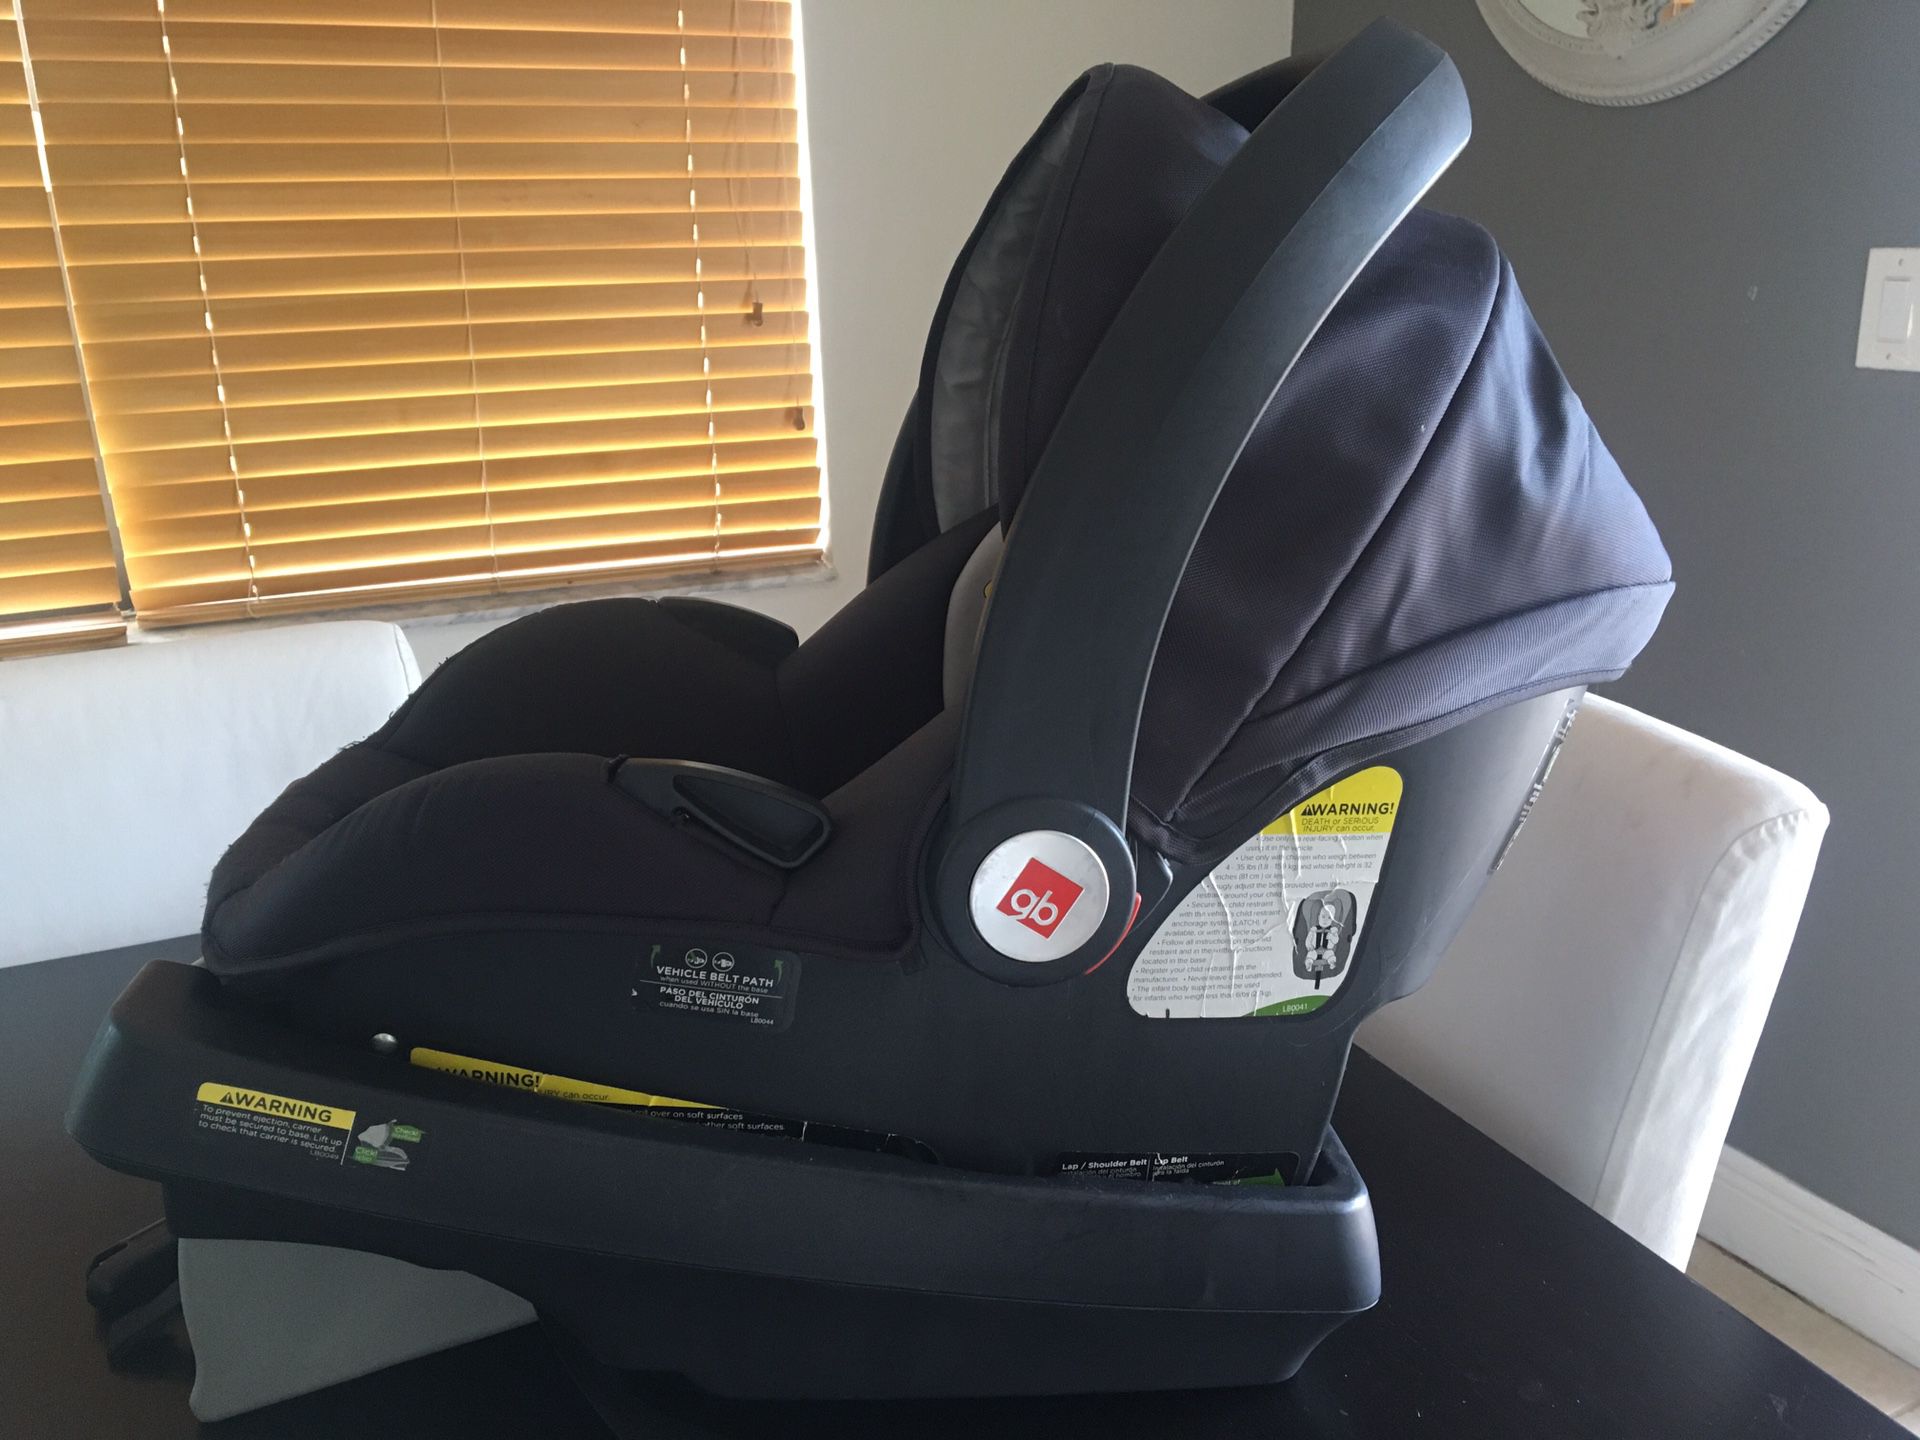 GB infant car seat, new/mint condition!! $35 great deal!!